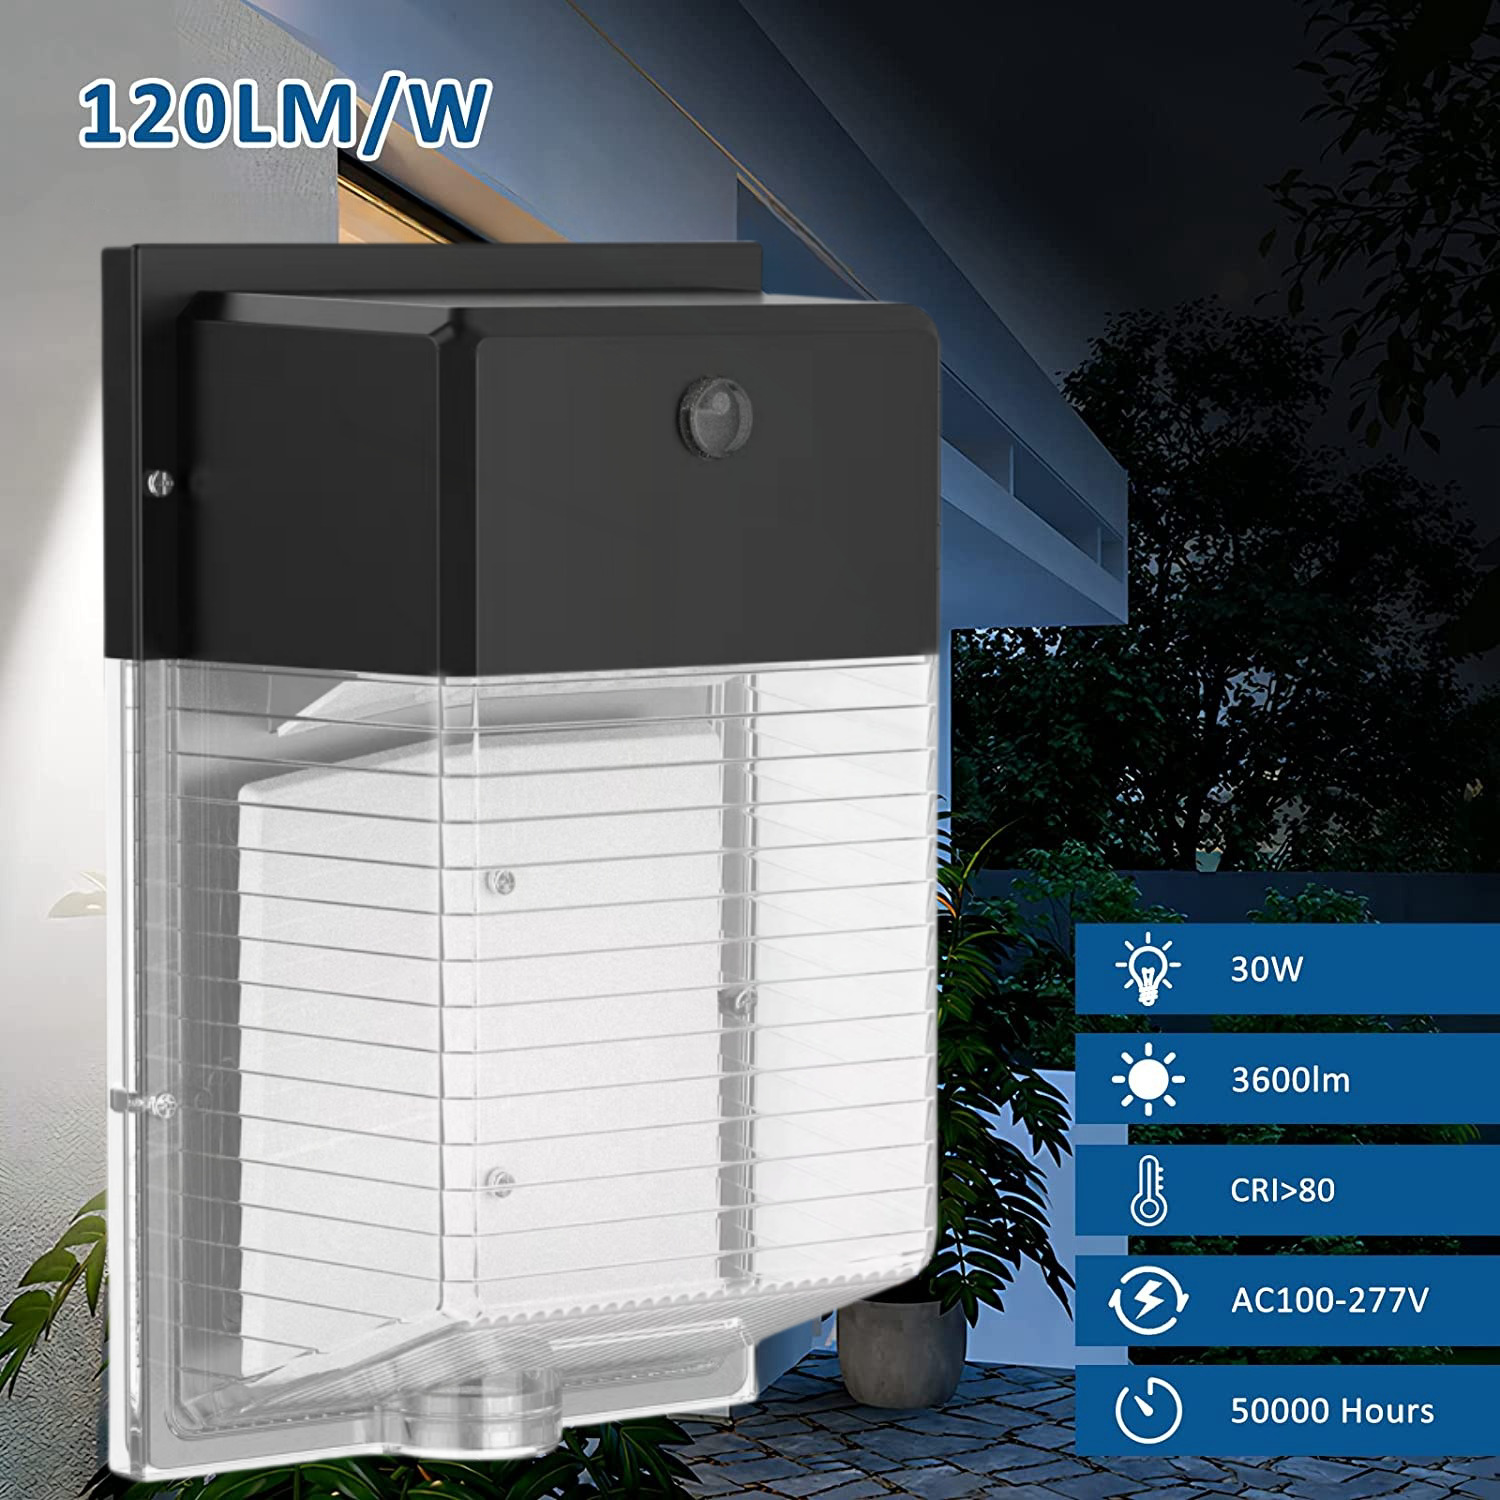 30W Mini LED Wall Pack with Photocell Sensor IP65 Outdoor Security Flood Light